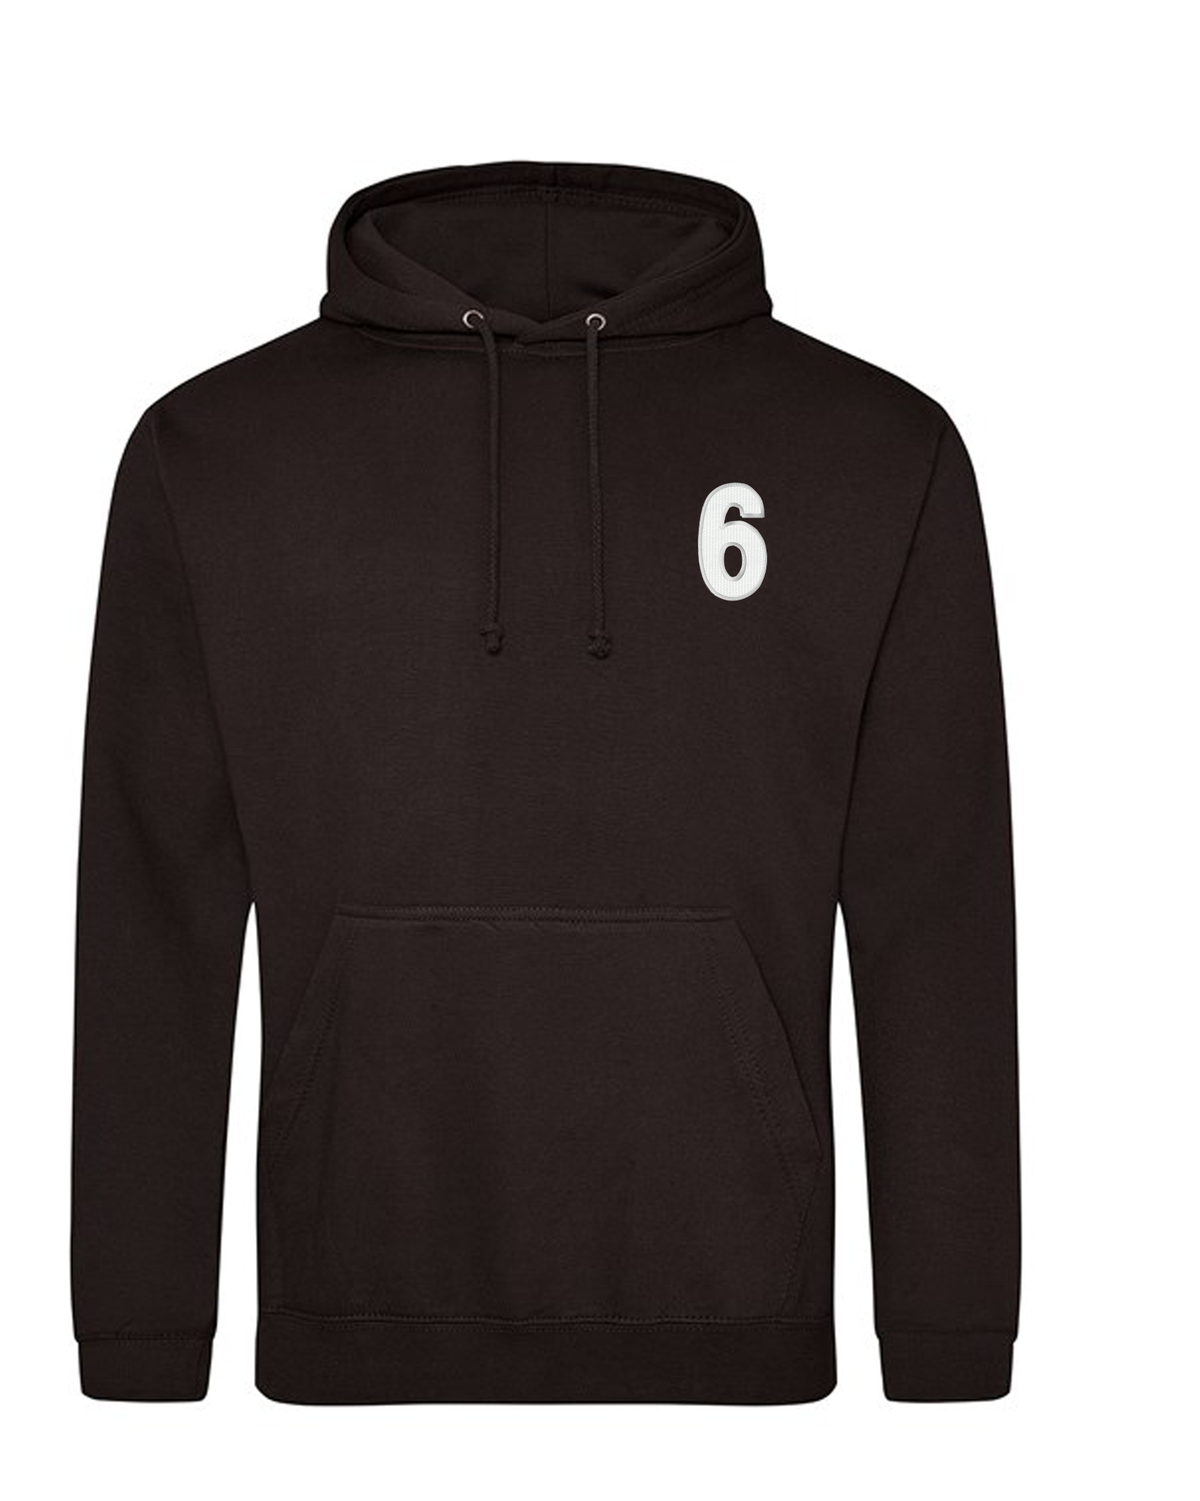 Duncan Edwards - Embroidered '6' Hoodie